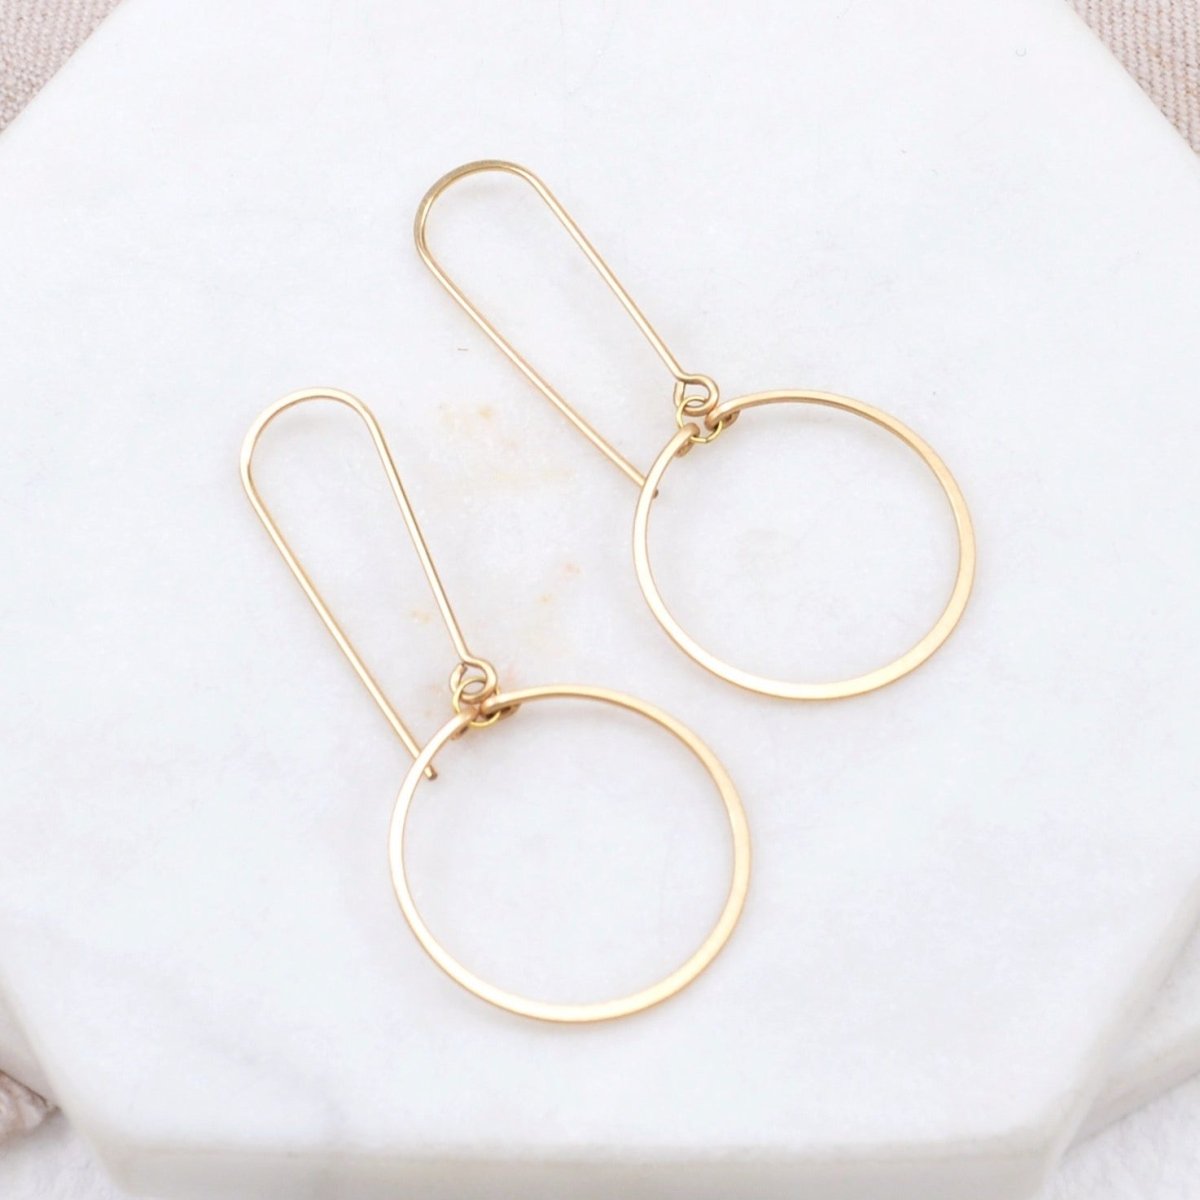 Delicate drop circle earrings formed out of gold-fill wire. Designed and handmade by Amy Olson in Portland, OR.